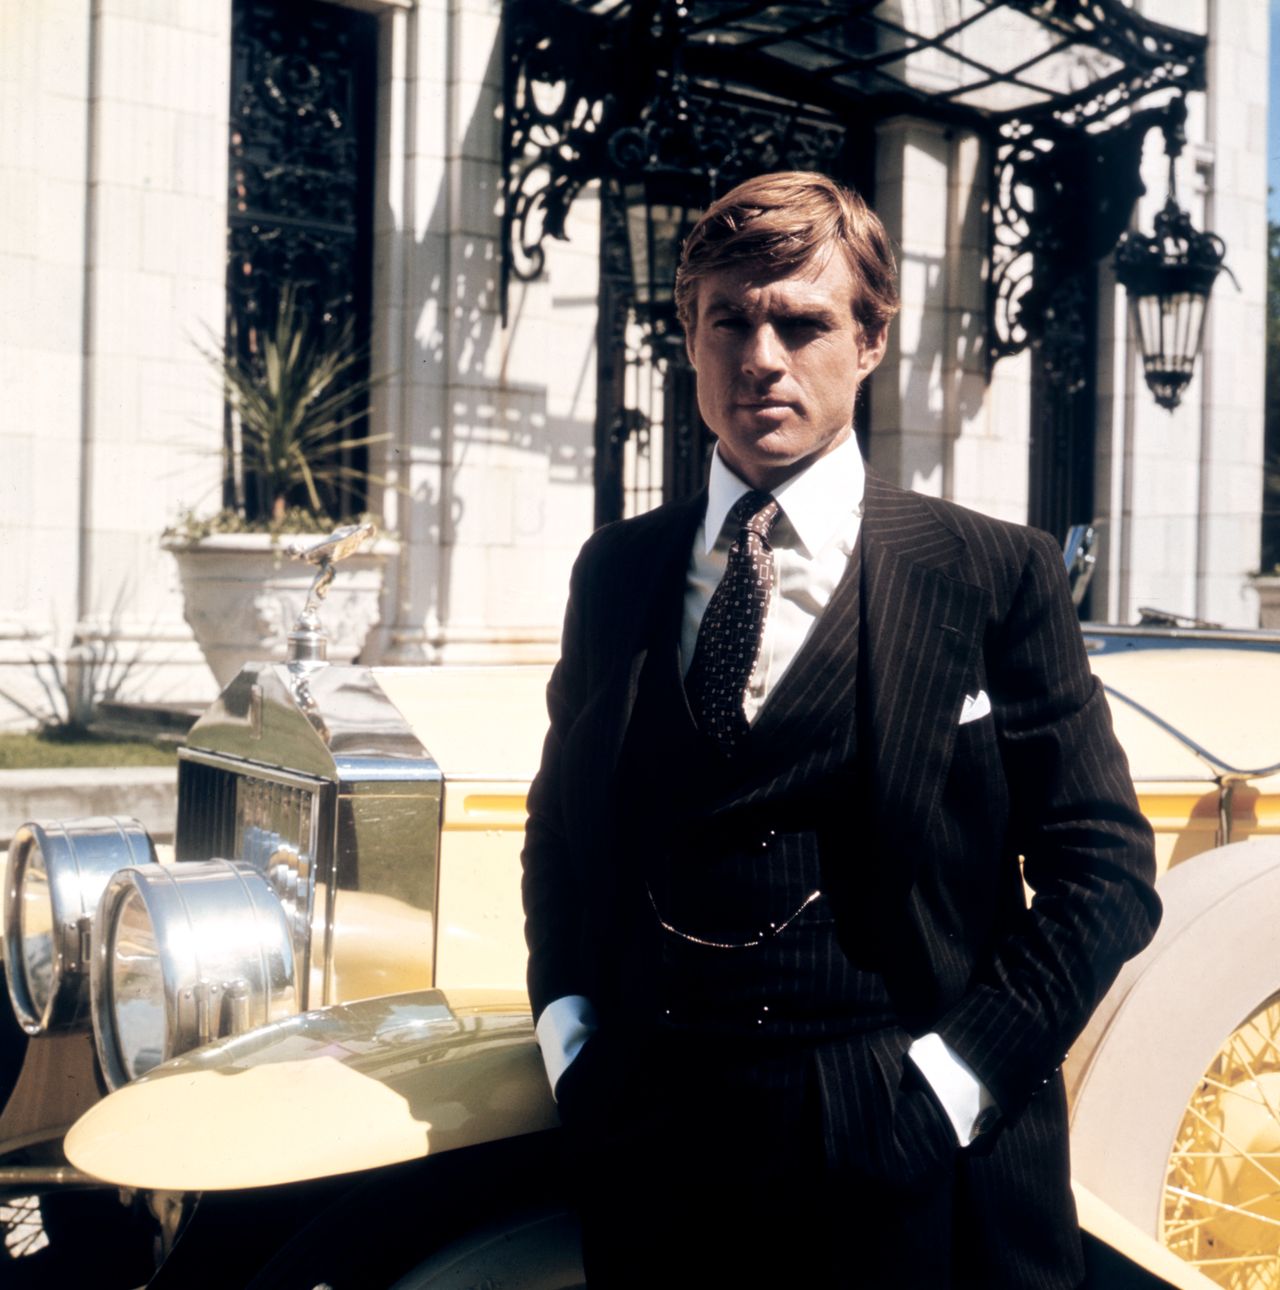 American actor Robert Redford on the set of The Great Gatsby based on the novel by F. Scott Fitzgerald, and directed by British Jack Clayton